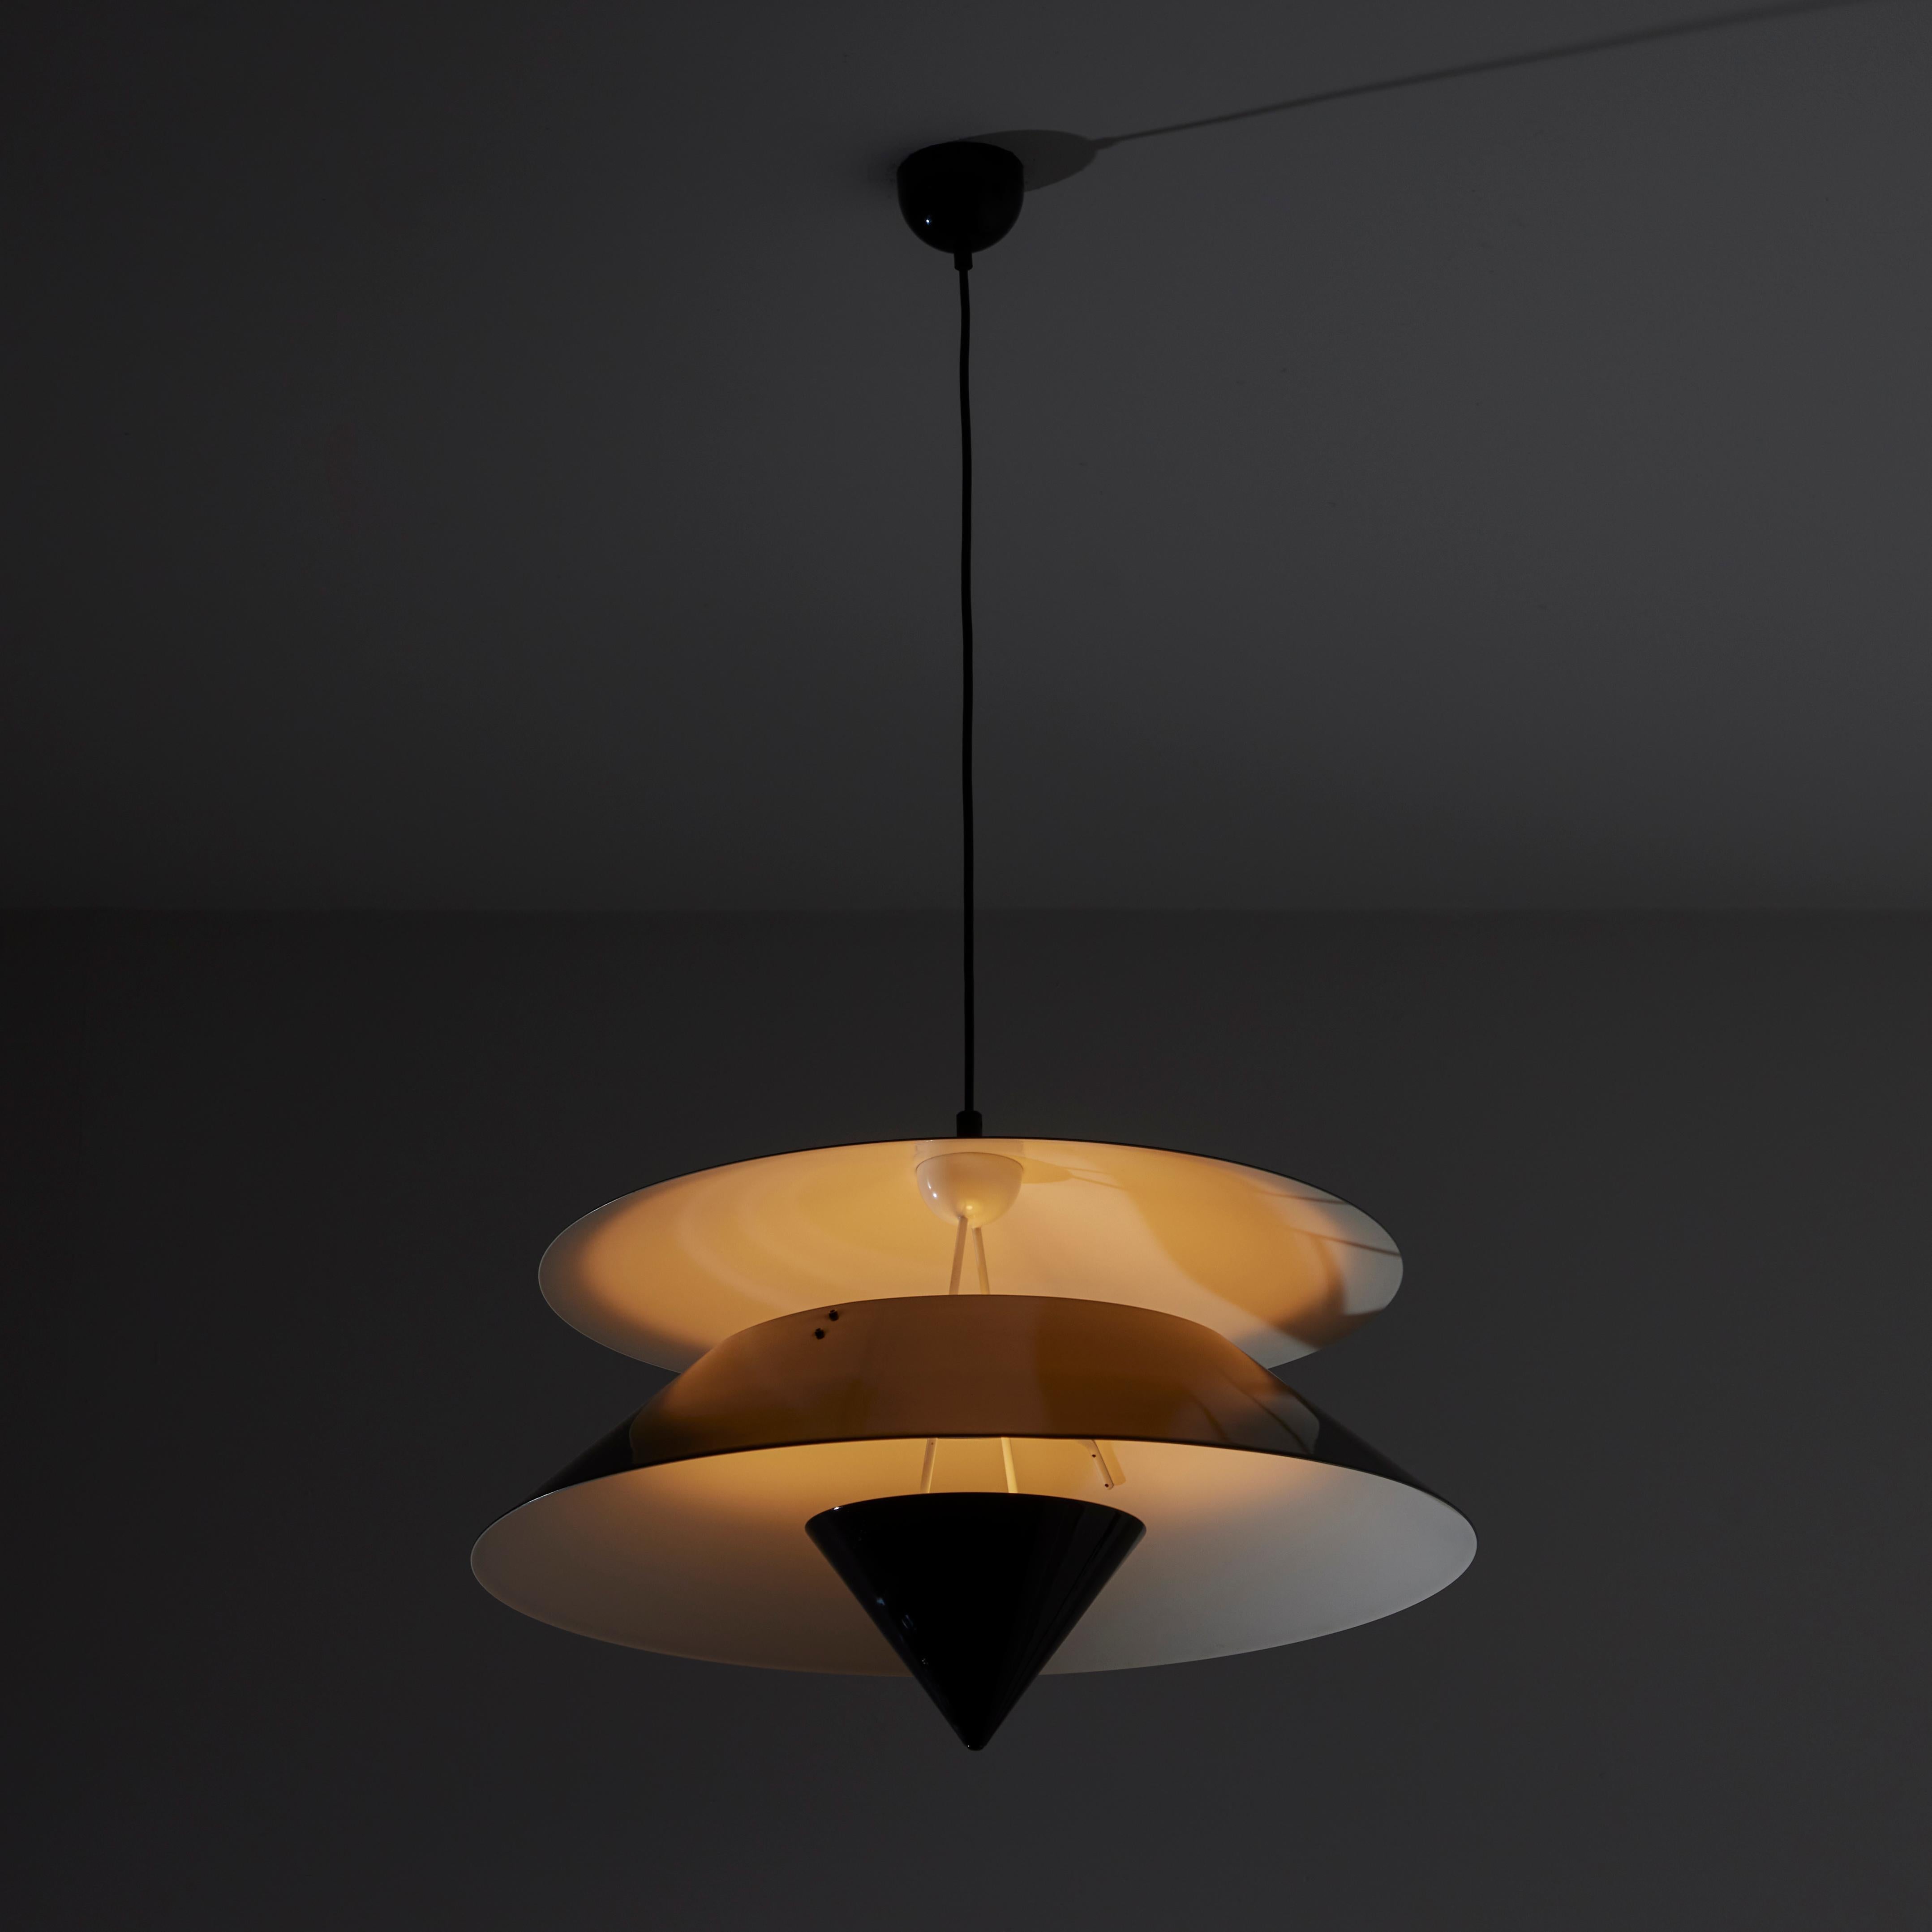 'Akaari' Ceiling Light by Vico Magistretti for Oluce. Designed and manufactured in Italy, circa the 1980s. The Akaari pendant features three tiered glossy black diffusers. The bottom cone diffuser allows the light source to reflcet back upwards but